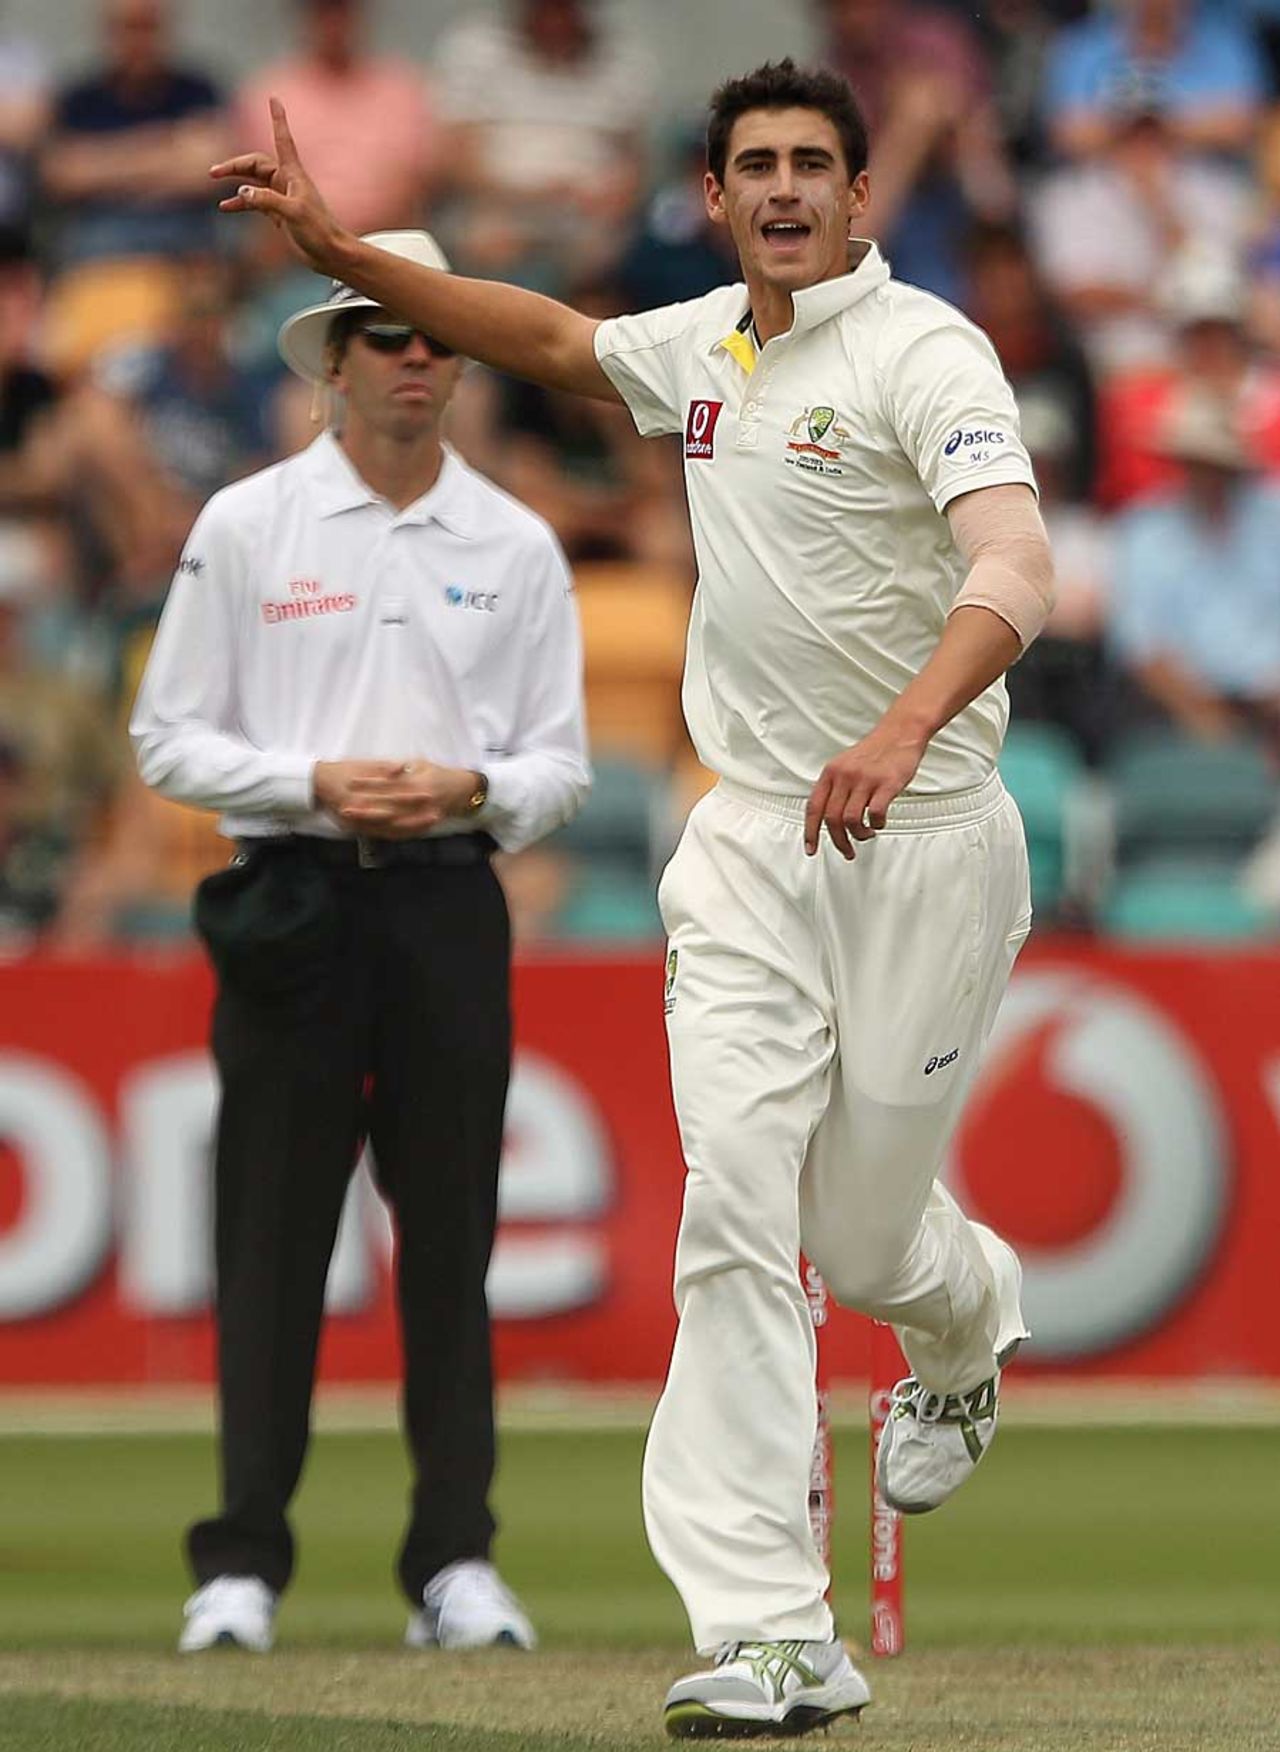 Mitchell Starc picked up two wickets, Australia v New Zealand, 2nd Test, Hobart, 1st day, December 9, 2011